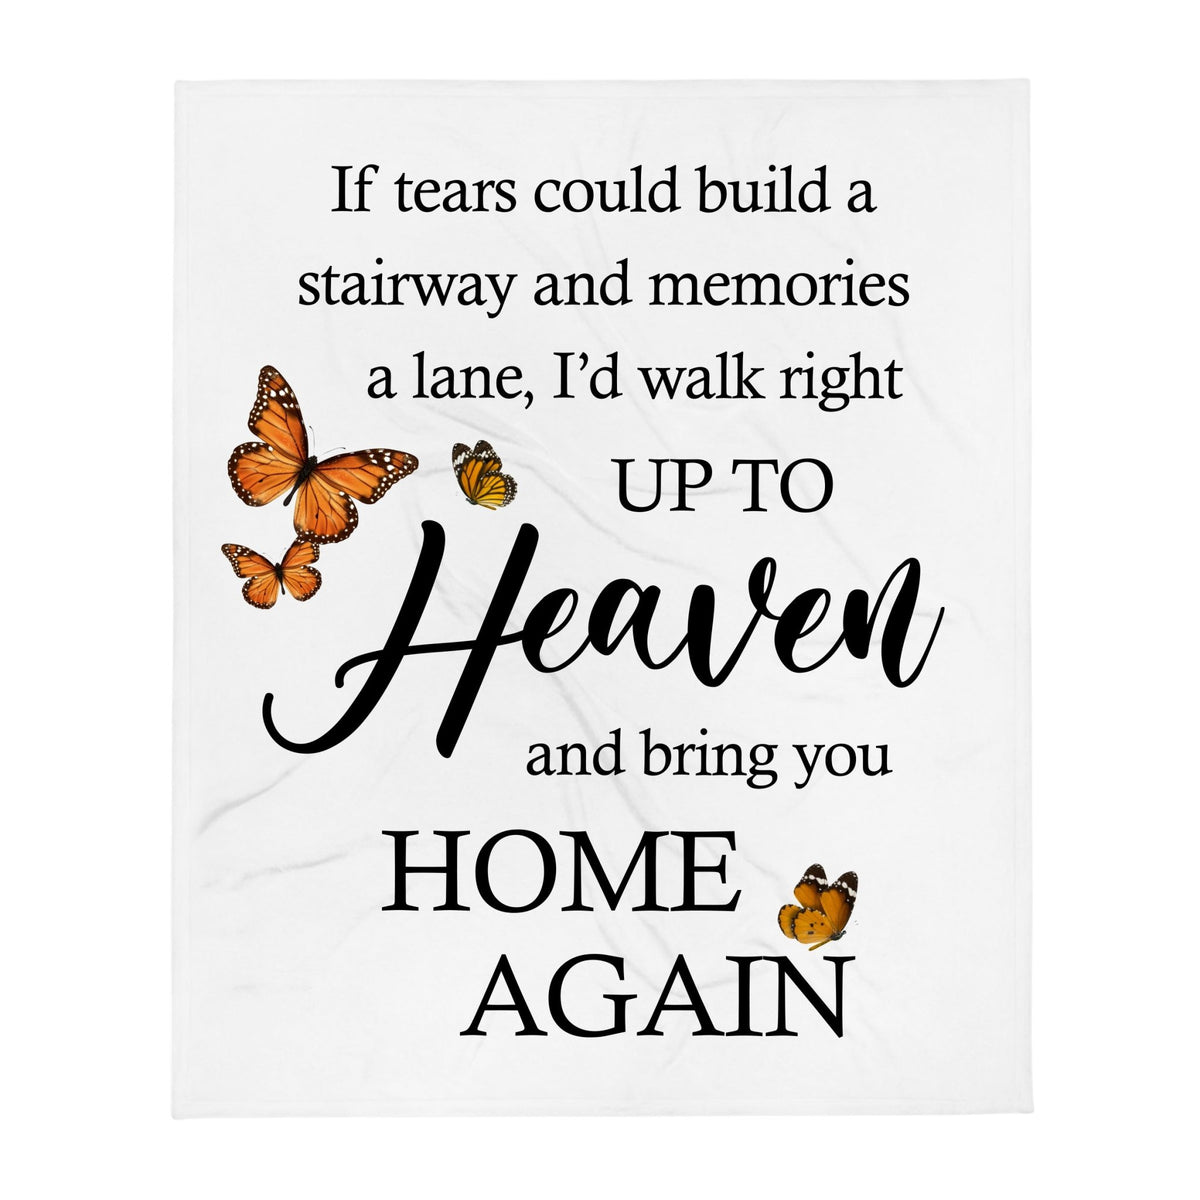 Memorial Decorative Throw Pillow Sympathy Gift &amp; Home Decor Idea - If Tears Could Build a Stairway to Heaven